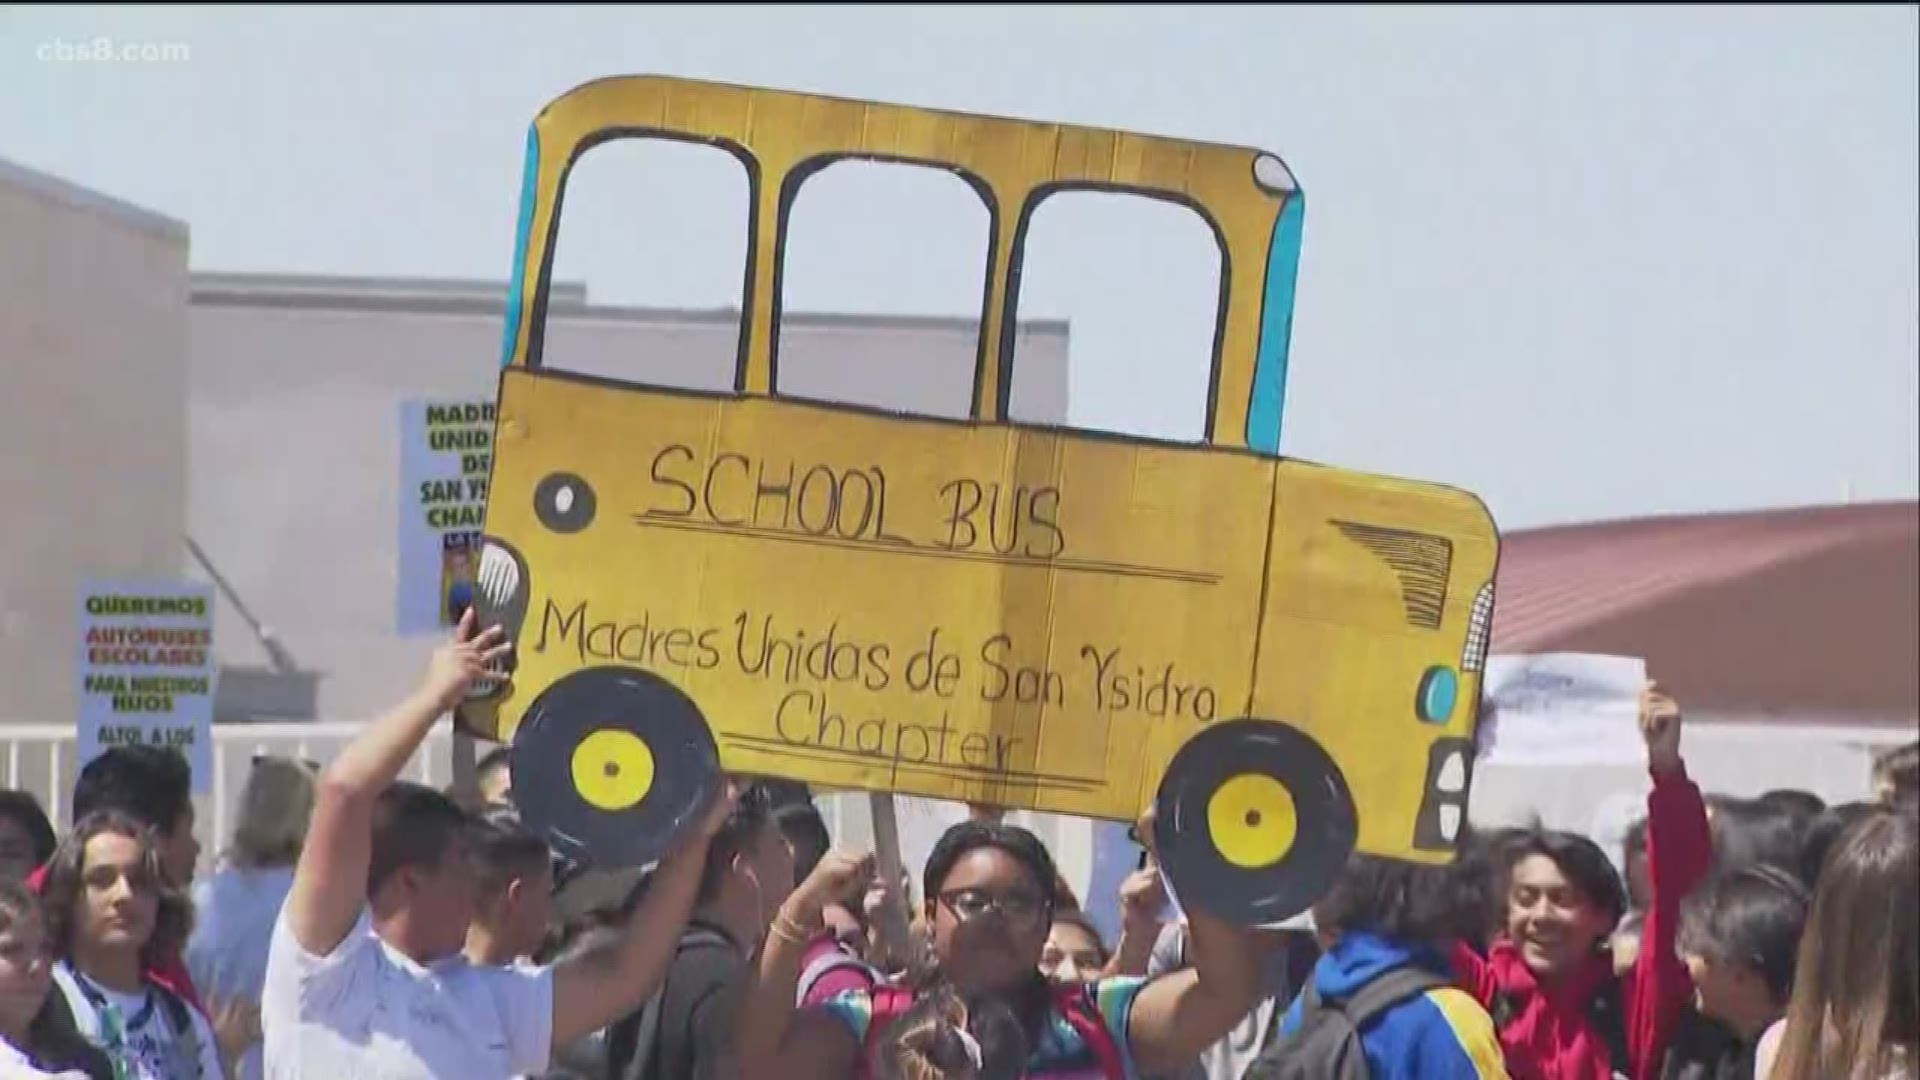 Hundreds of students walked out of class Friday at San Ysidro High School, protesting the Sweetwater Union High School District cutting bus routes.